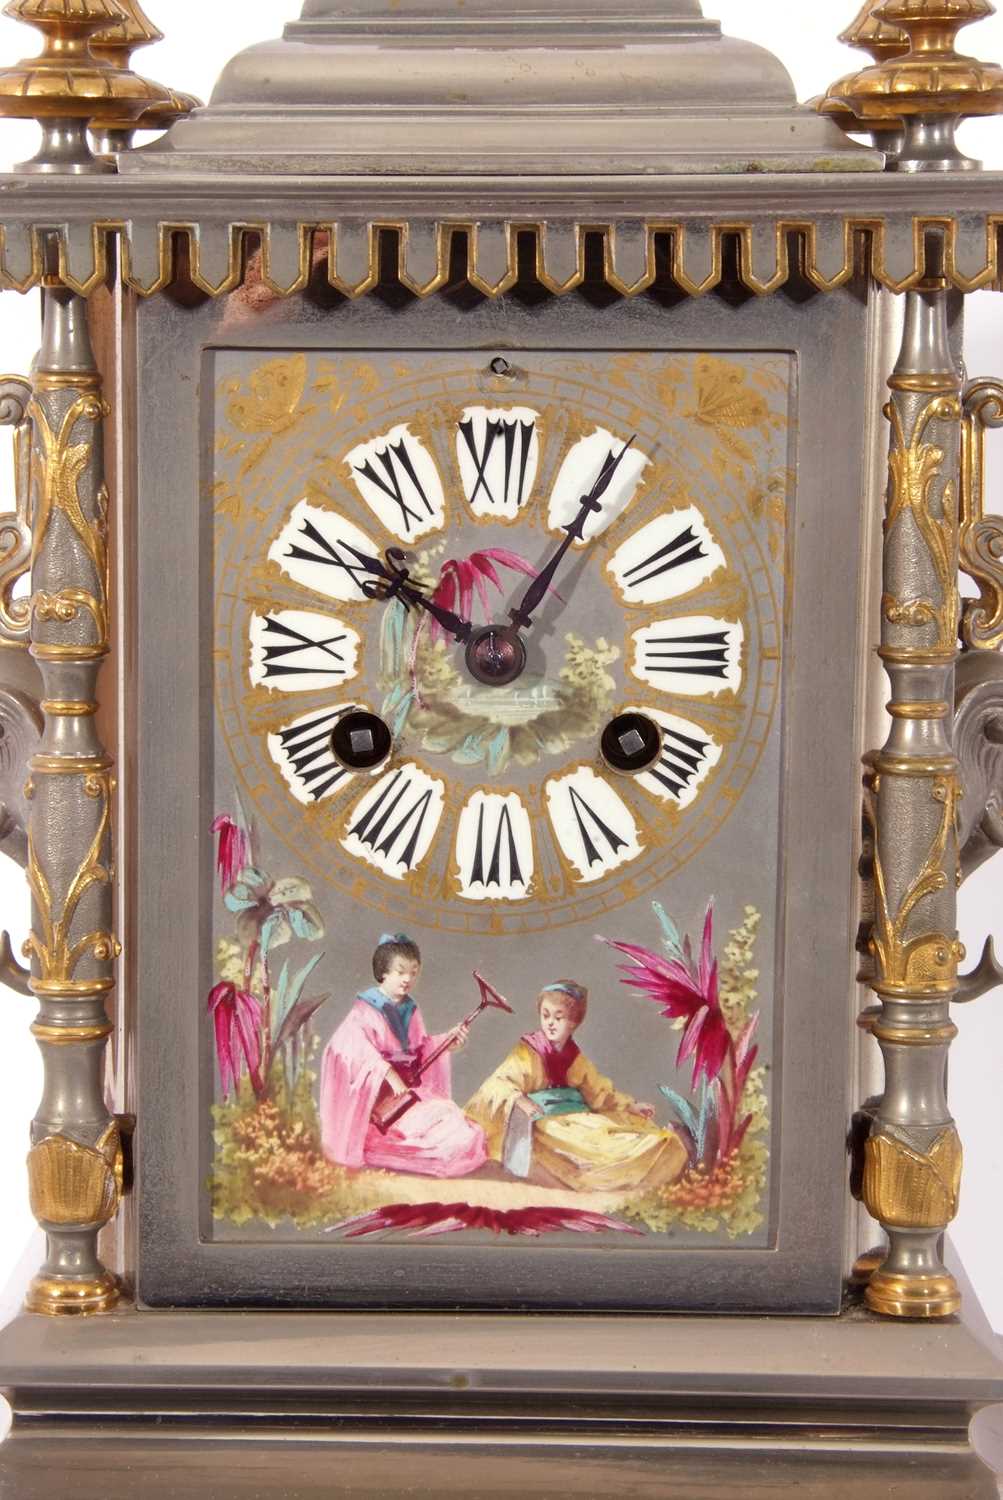 Good quality late 19th/early 20th century mantel clock, set in architectural metal and gilt - Image 4 of 11